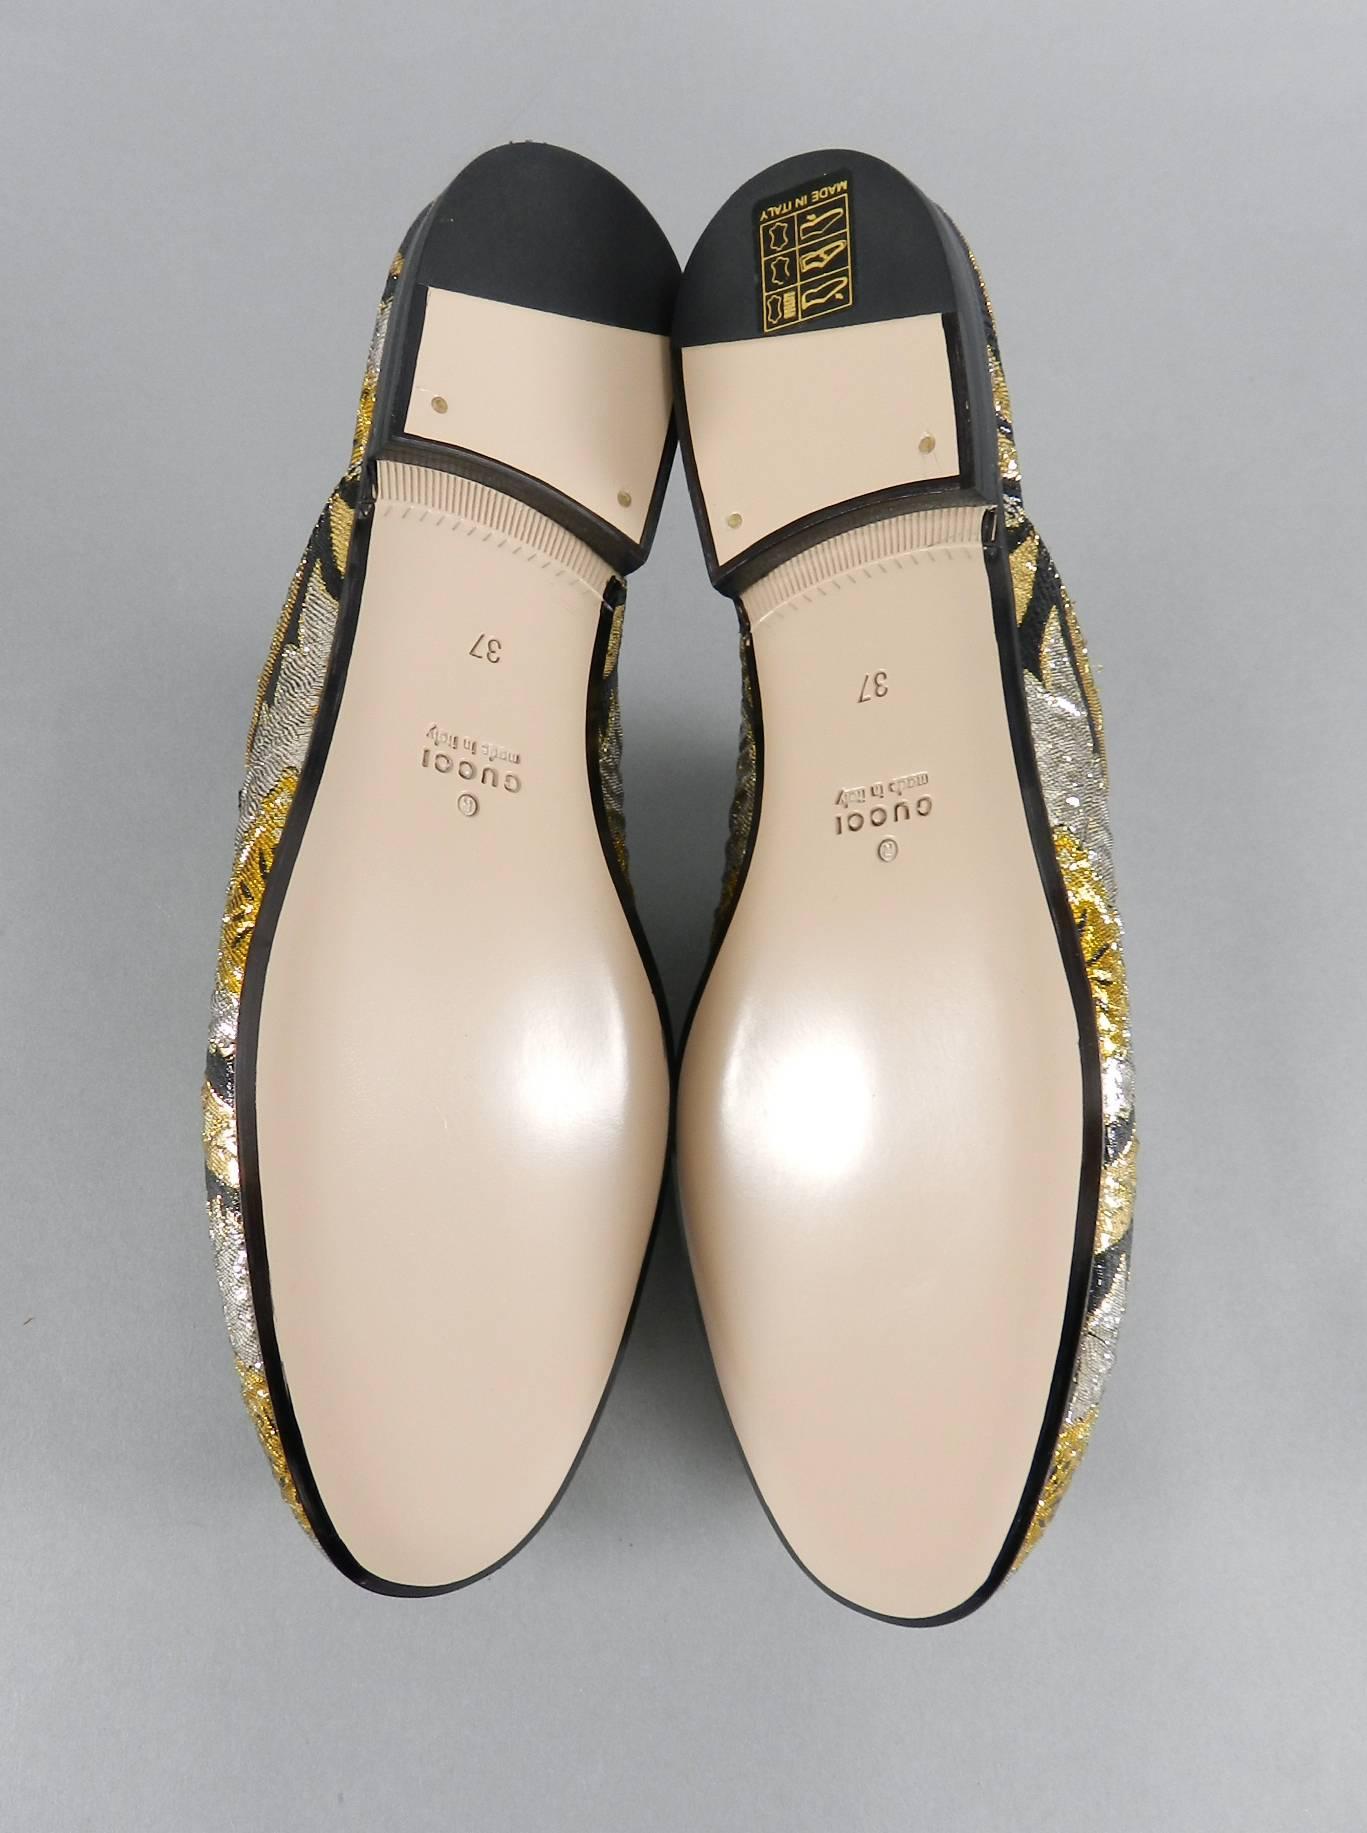 Women's Gucci Princetown Gold Brocade Mules Loafers